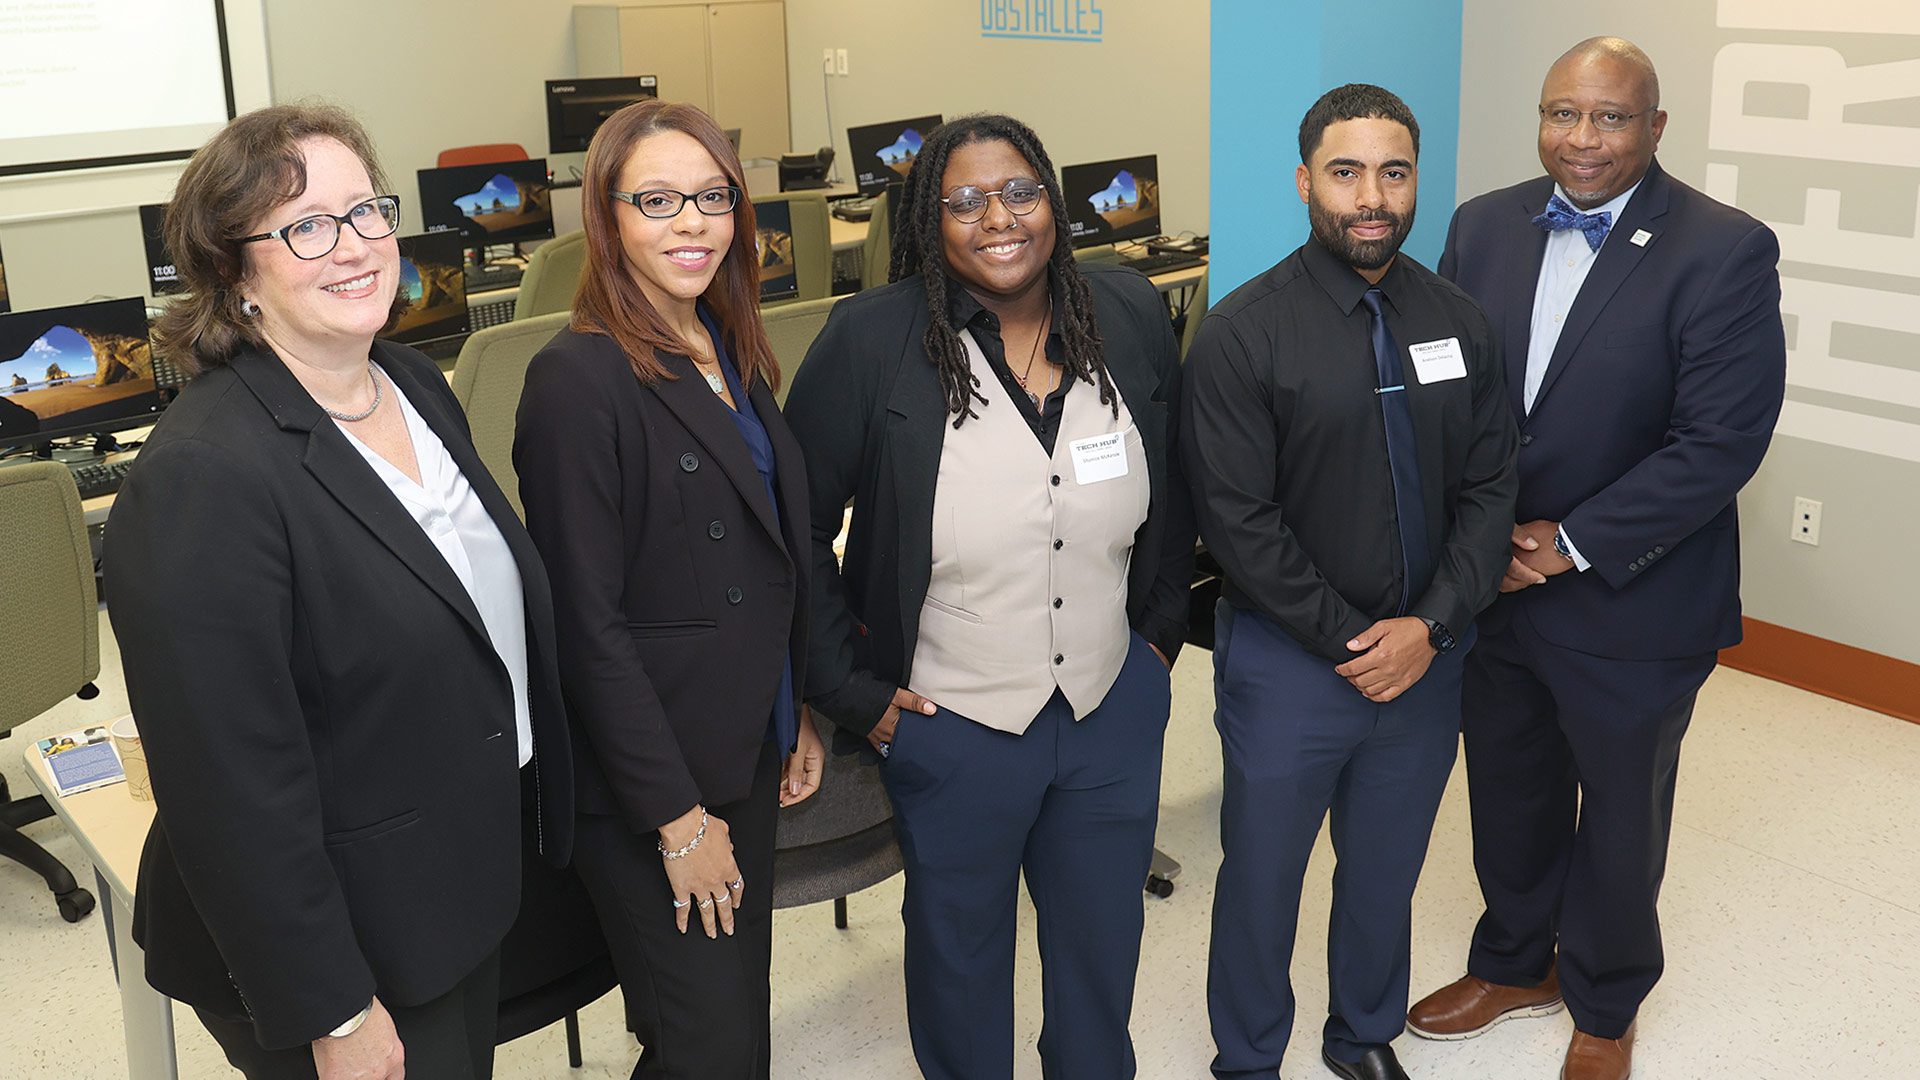 Tricia Canavan (far left) and HCC President George Timmons (far right) in the Tech Hub digital classroom with Tech Foundry graduates (and current Tech Hub fellows) Lasharie Weems, Shanice McKenzie, and Anelson Delacruz.